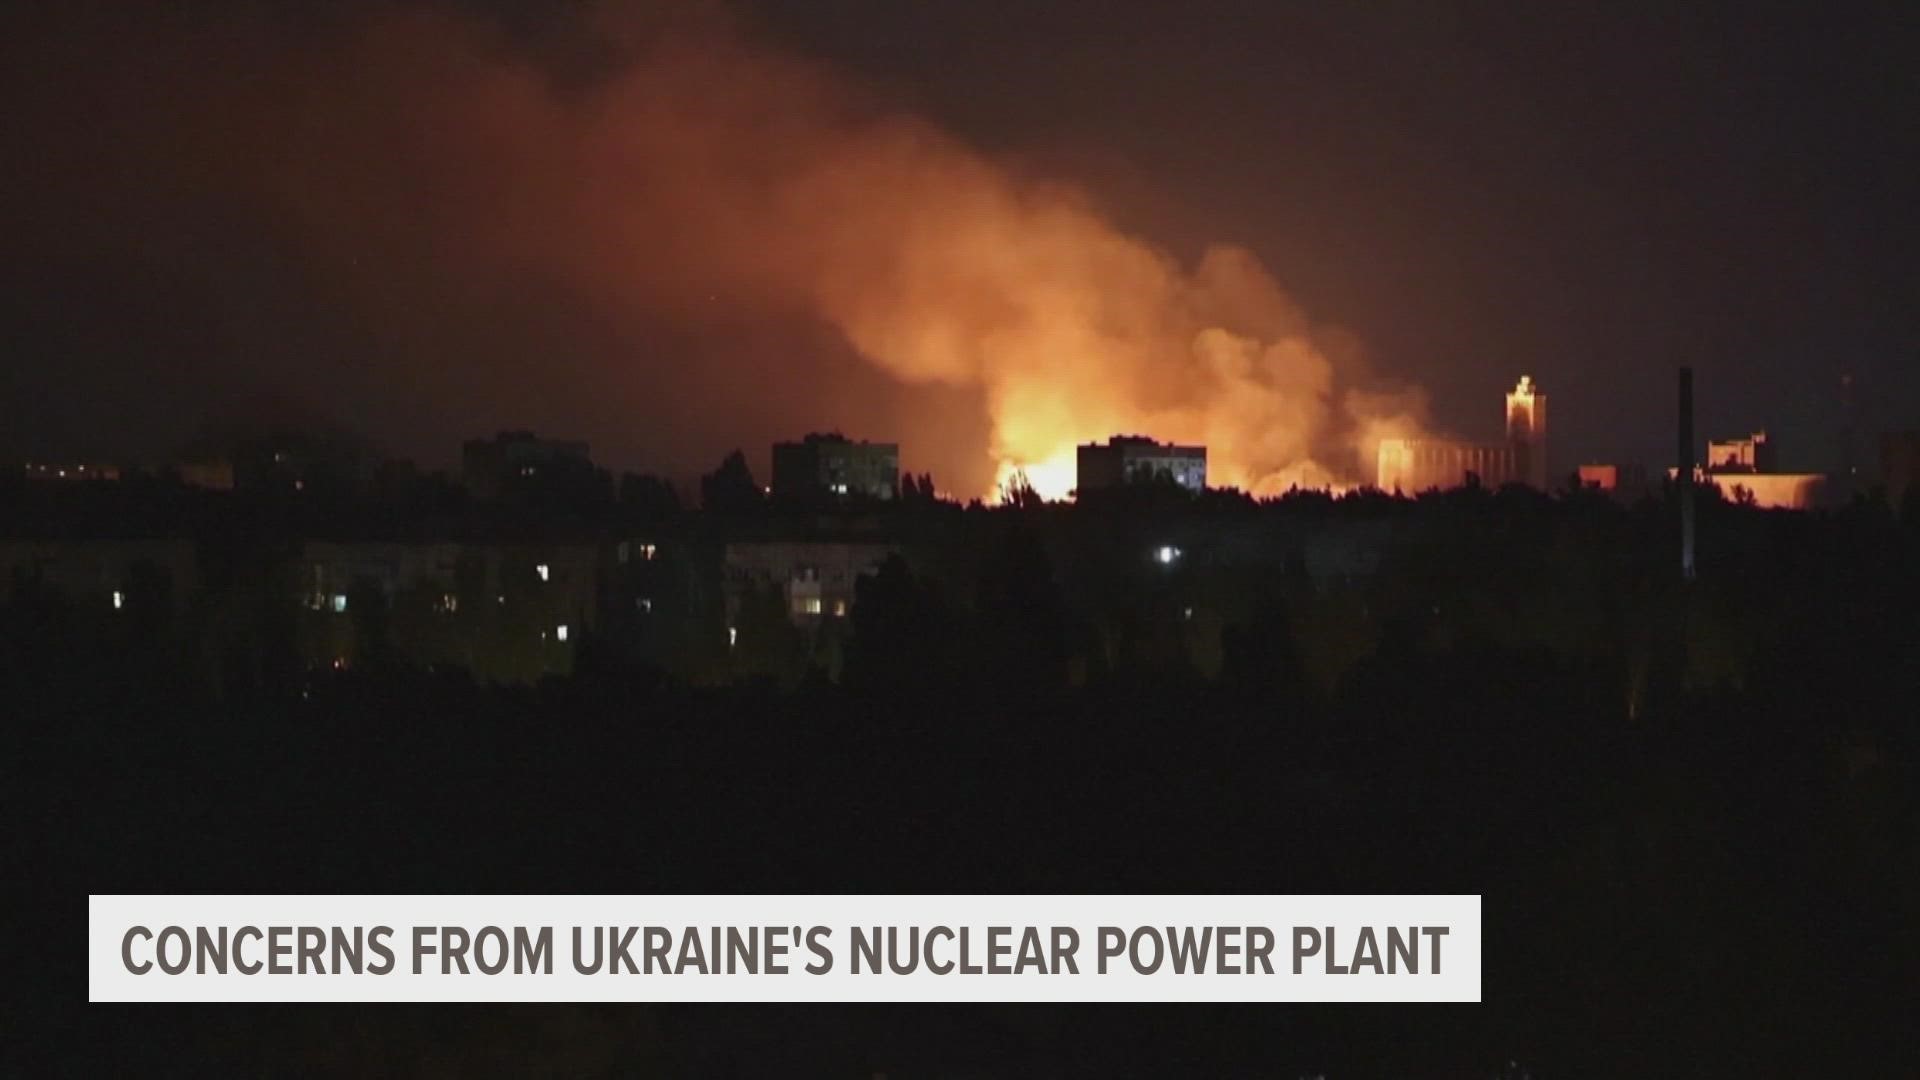 Repeated shelling between Russia and Ukraine caused damage to Europe's largest nuclear powerplant.